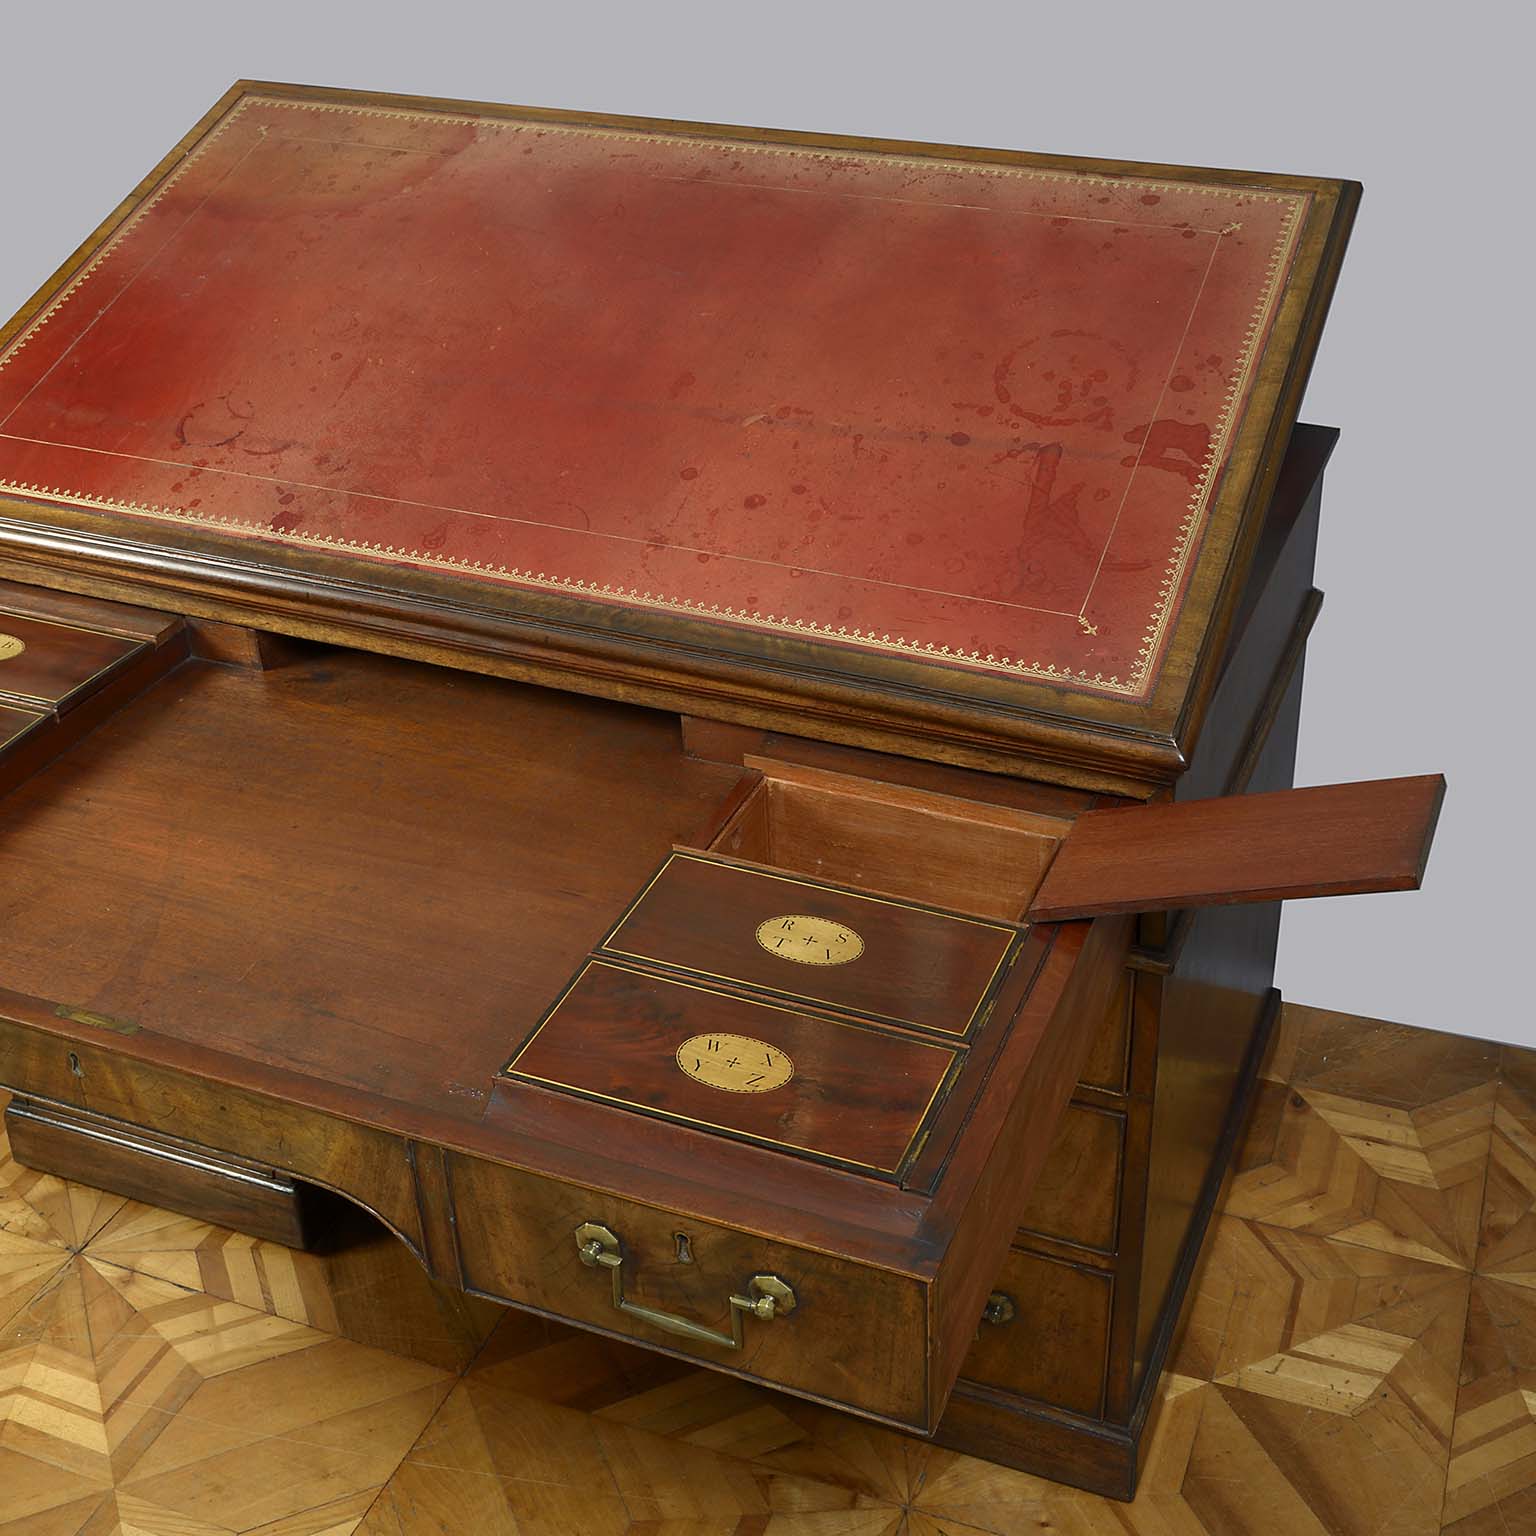 A George III Architects Desk